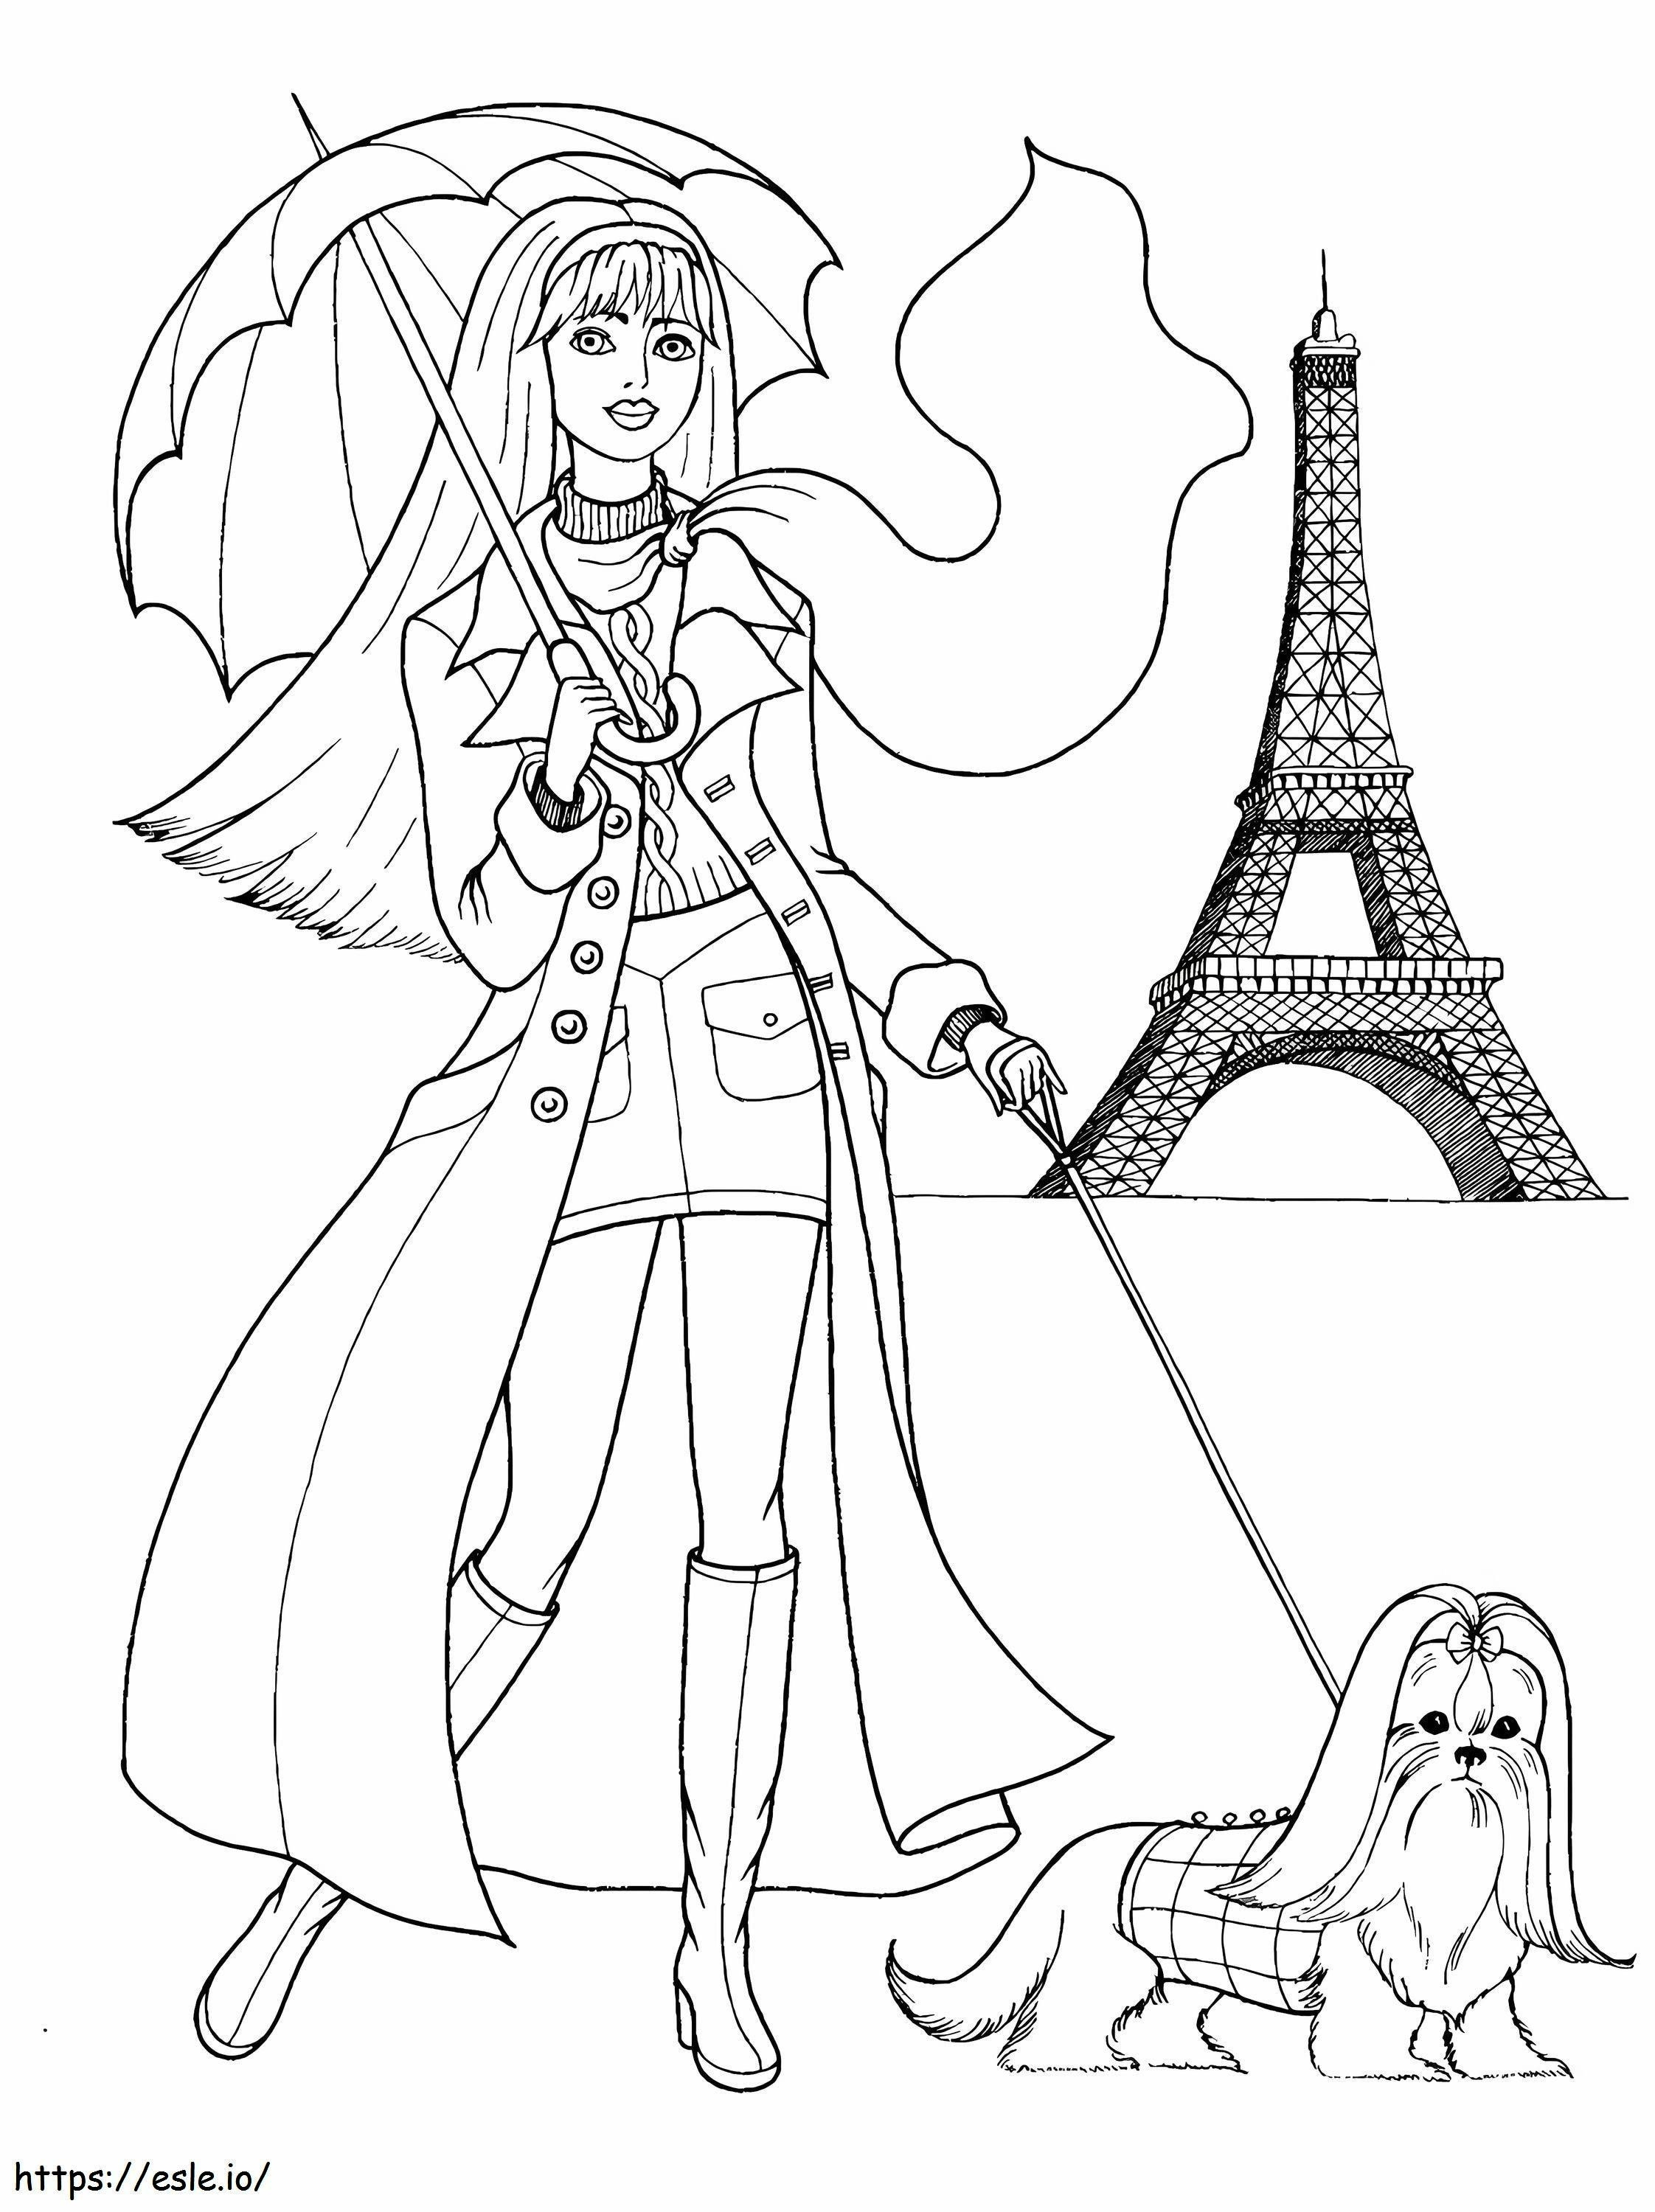 Teenage Girl With Her Dog In Paris coloring page